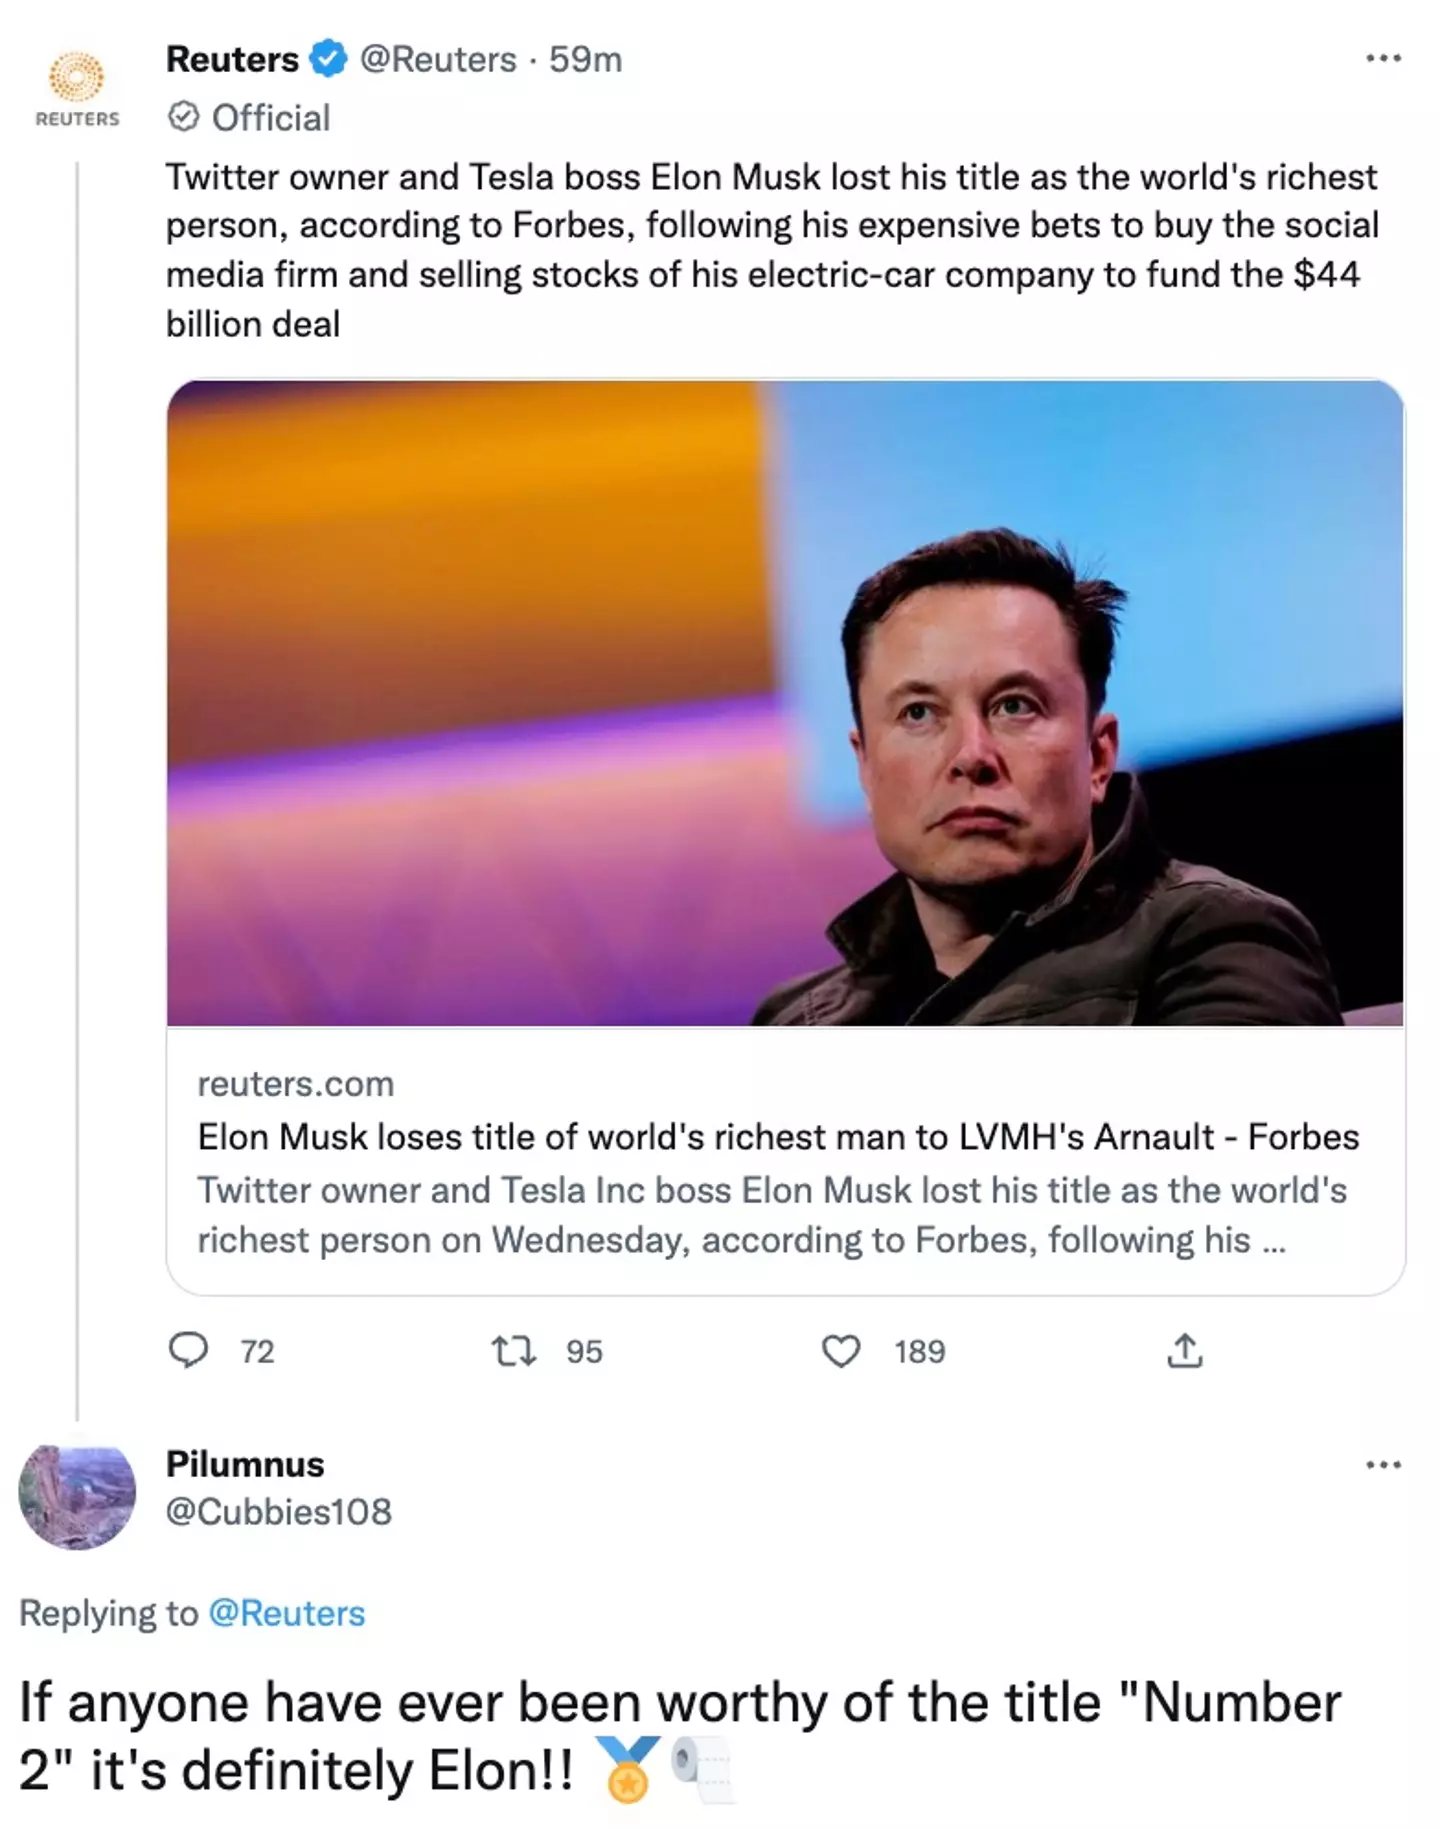 News of Musk's demotion didn't illicit much sympathy from Twitter users.